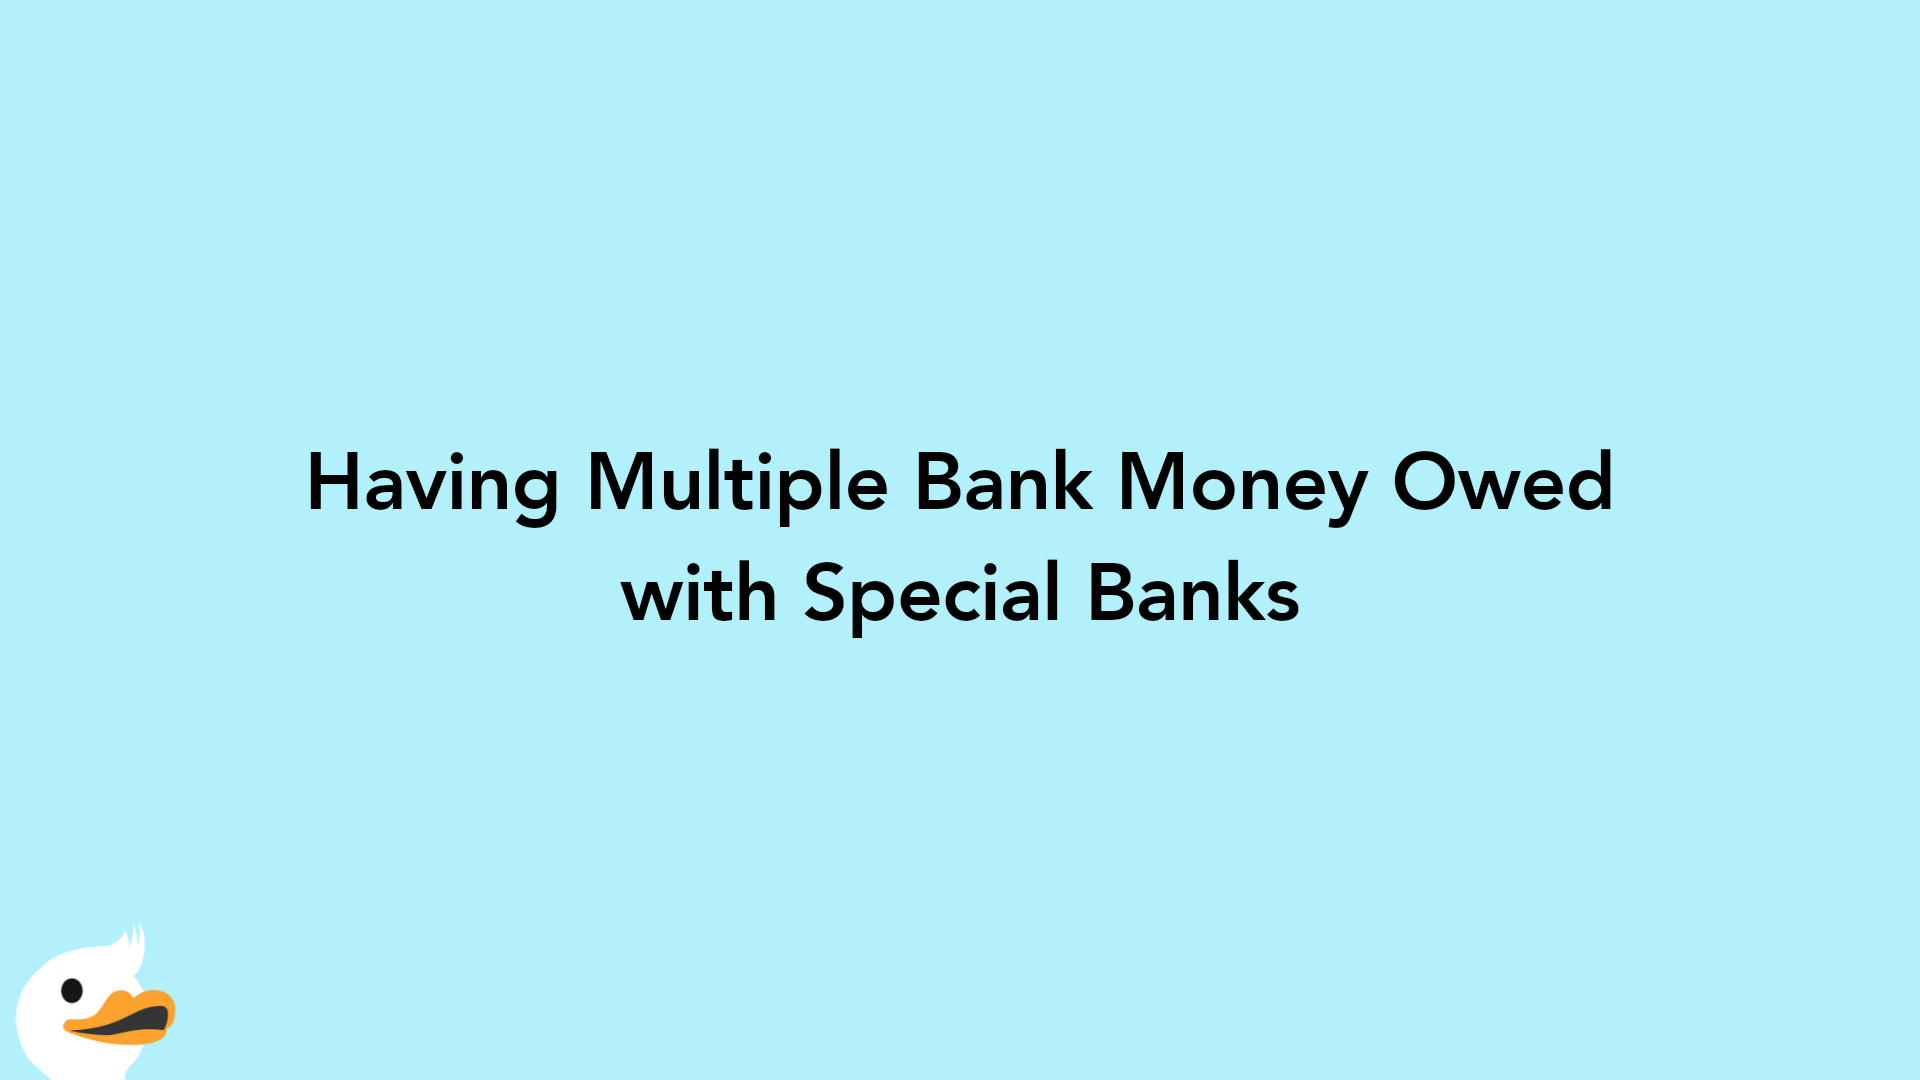 Having Multiple Bank Money Owed with Special Banks